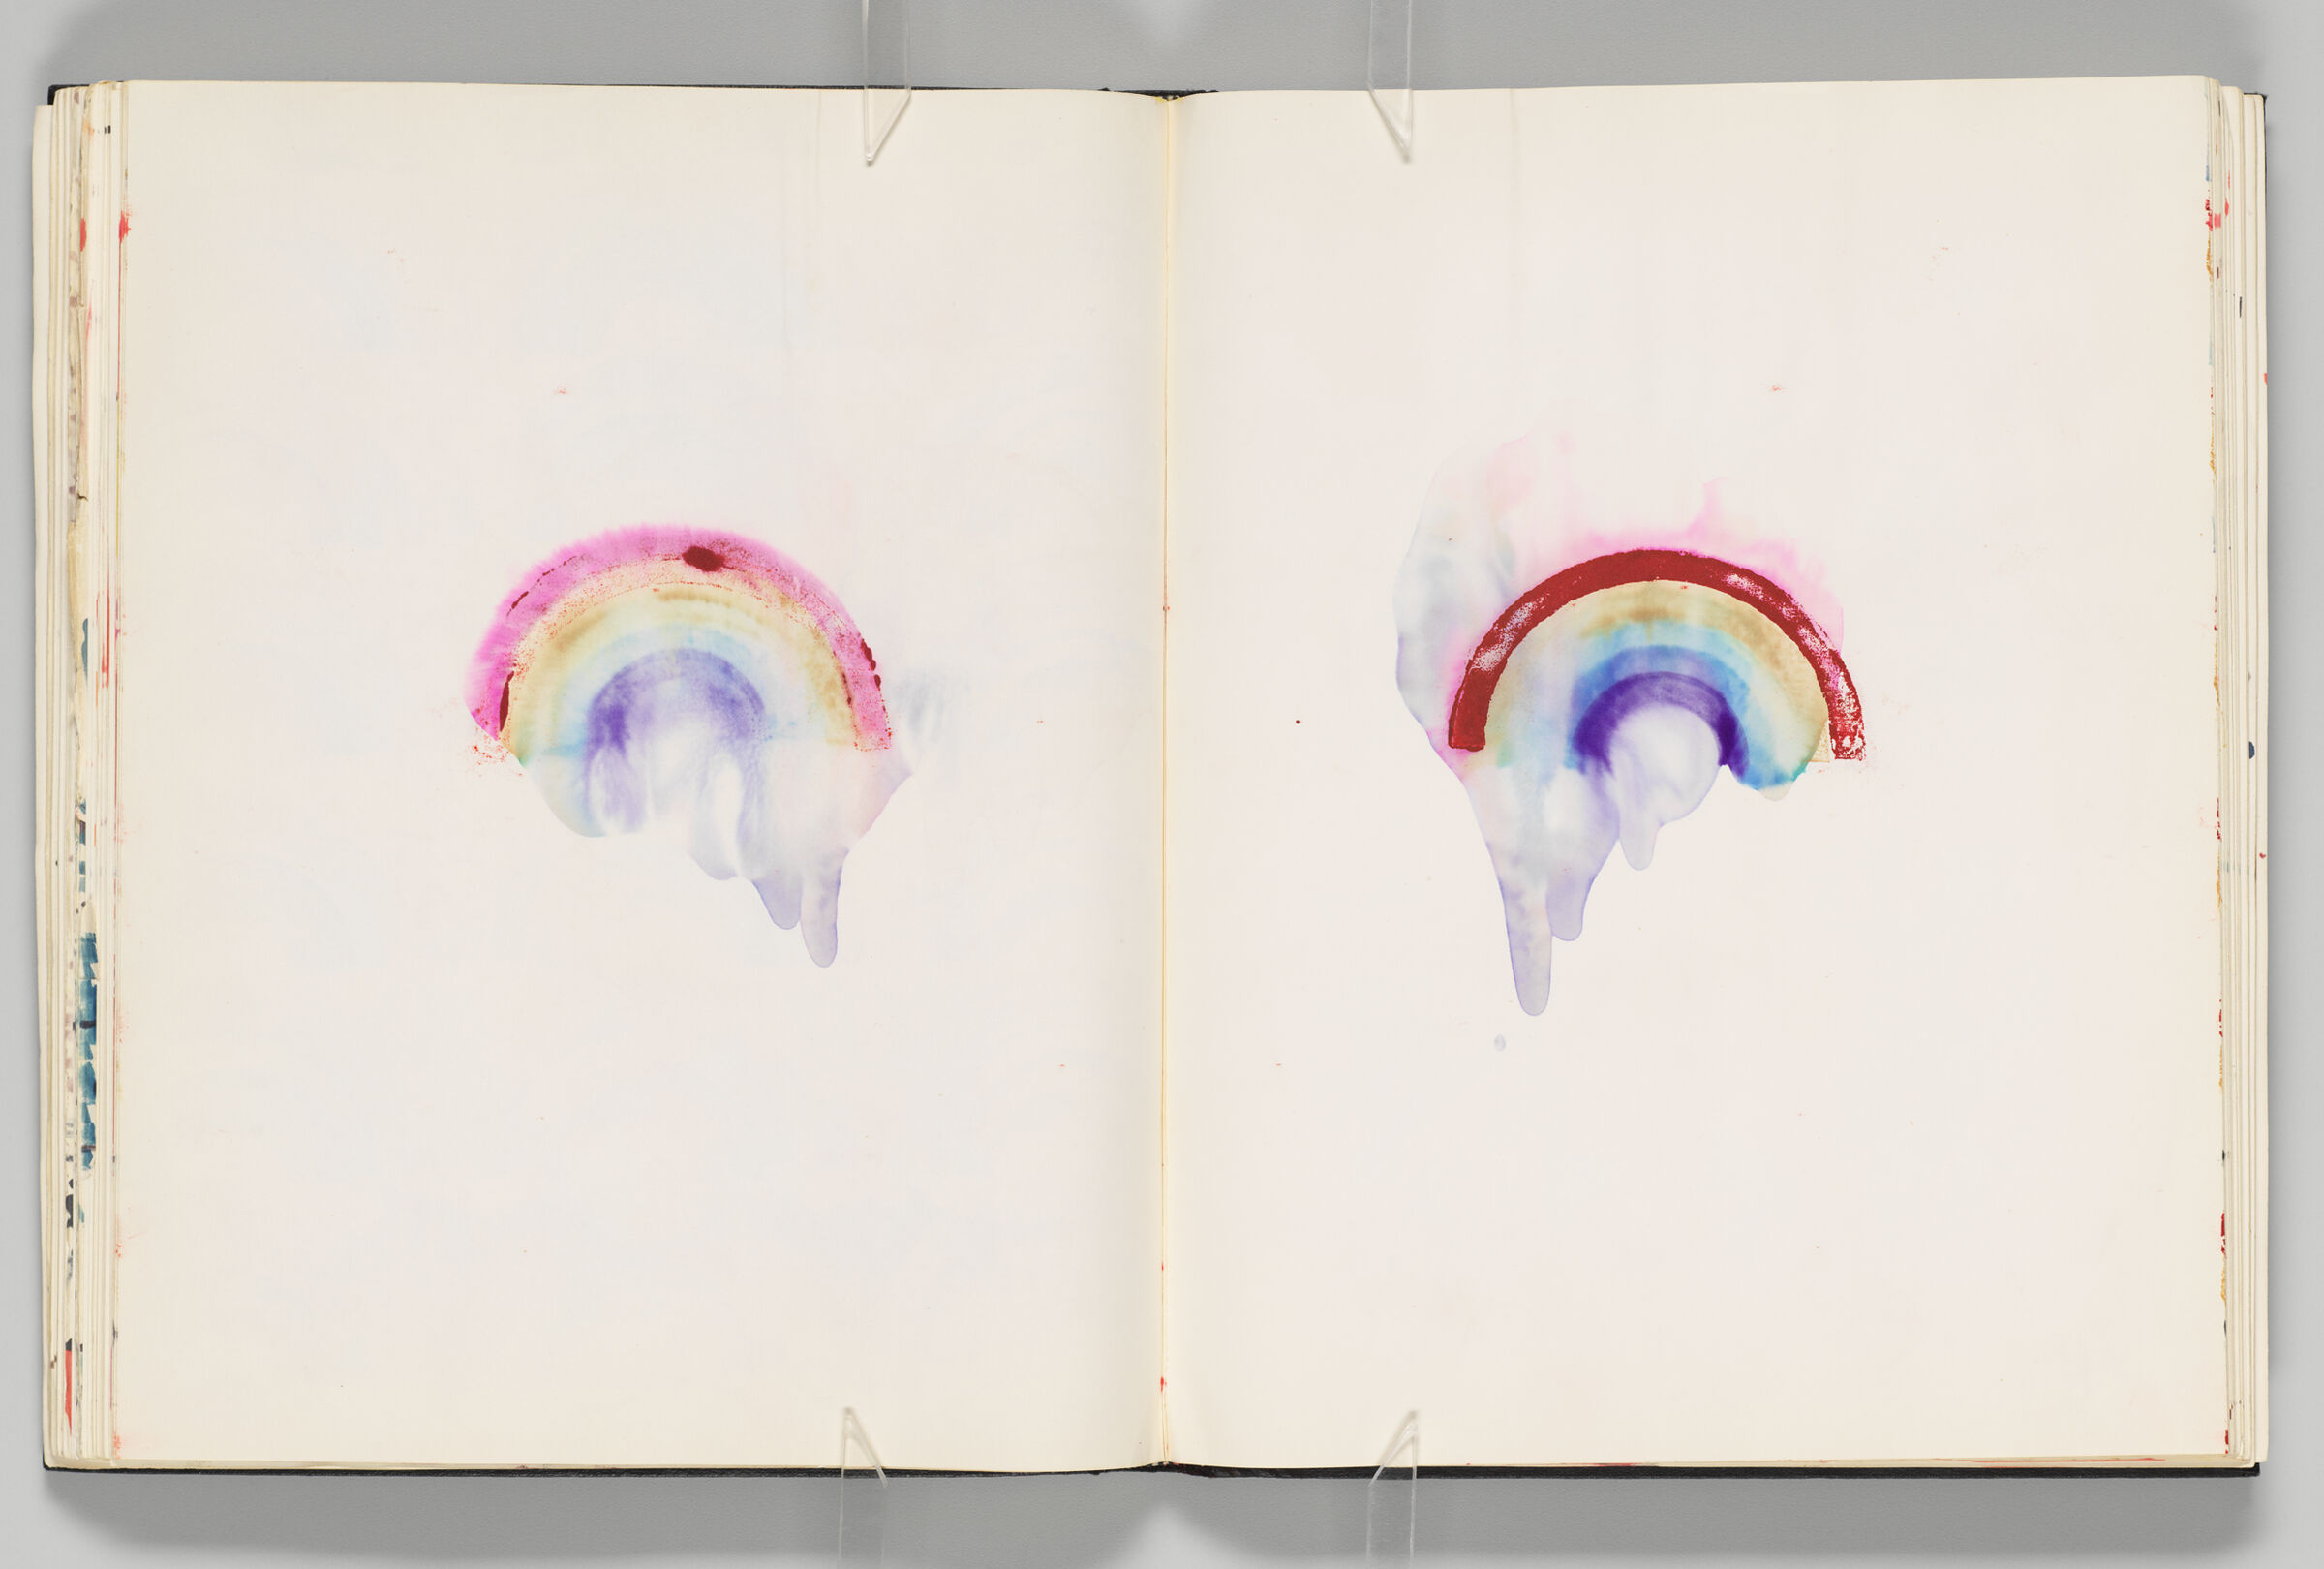 Untitled (Bleed-Through Of Previous Page, Left Page); Untitled (Rainbow Stamp Impression Manipulated With Water, Right Page)